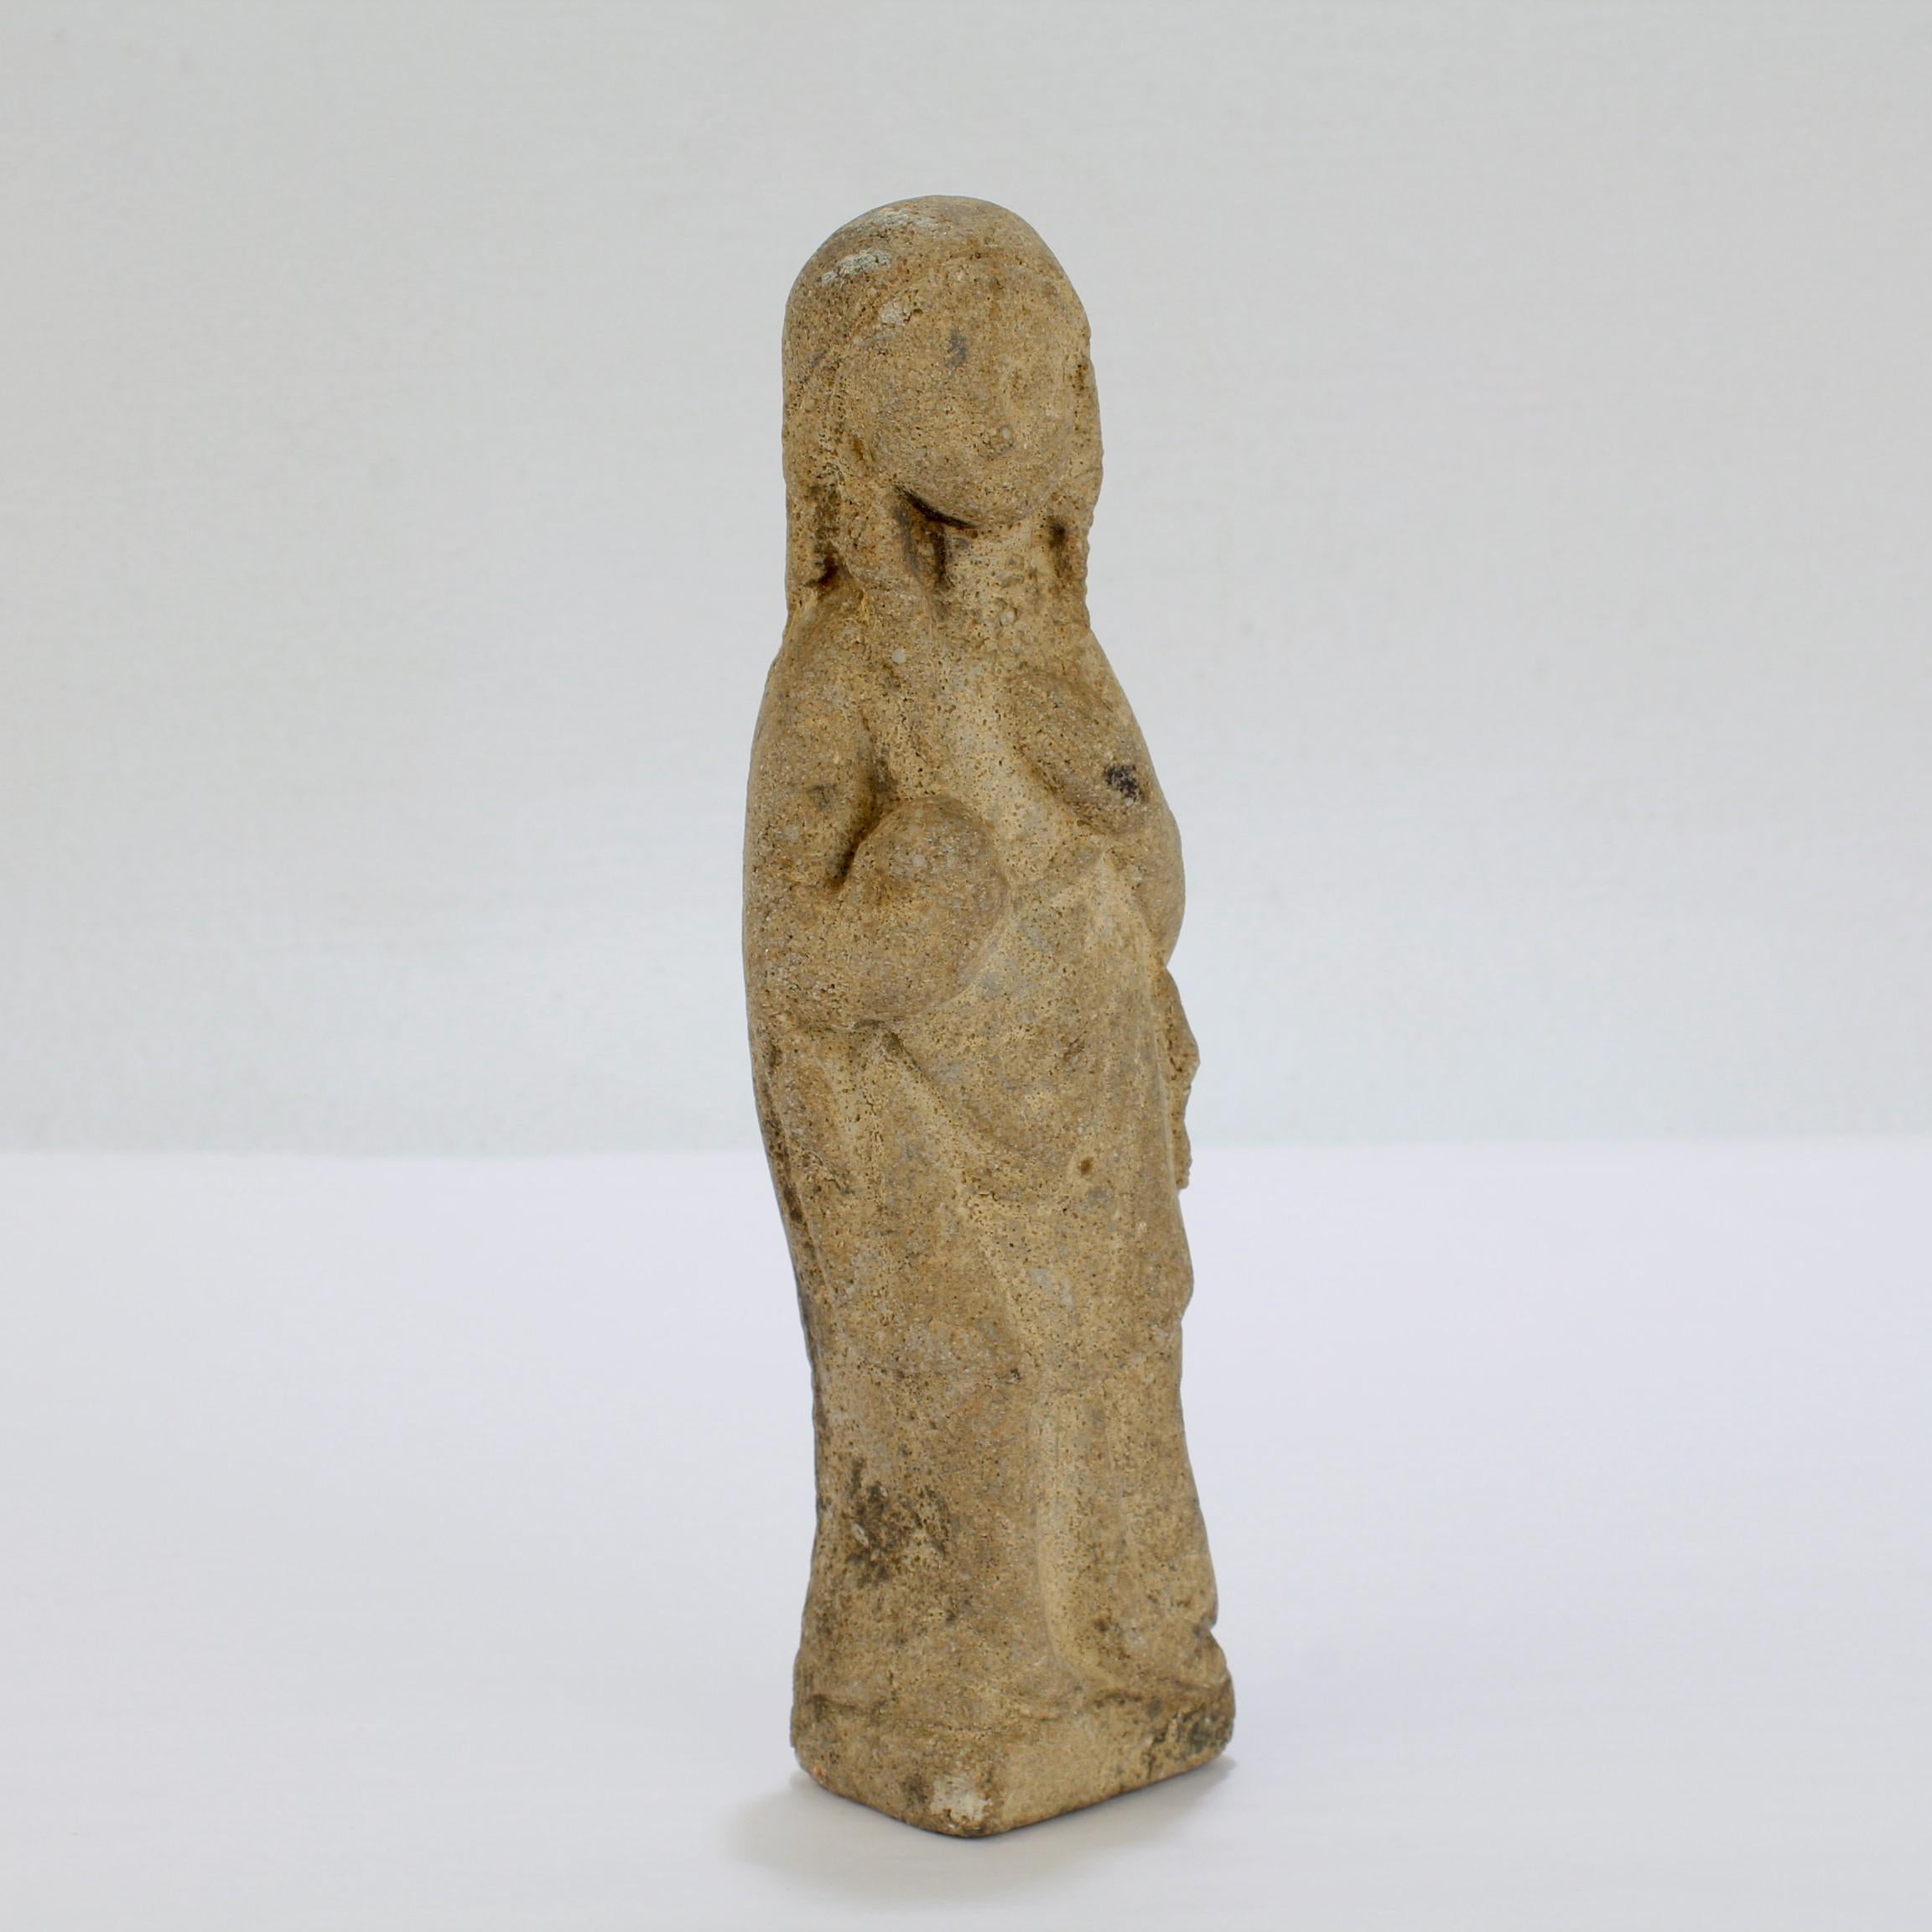 A fine antique limestone carving.

Modeled as a Madonna.

With her head slightly tilted, holding an orb in one hand, and with her other hand resting on her breast. 

By repute from the collection of William Kelly Simpson.

Simply a wonderful